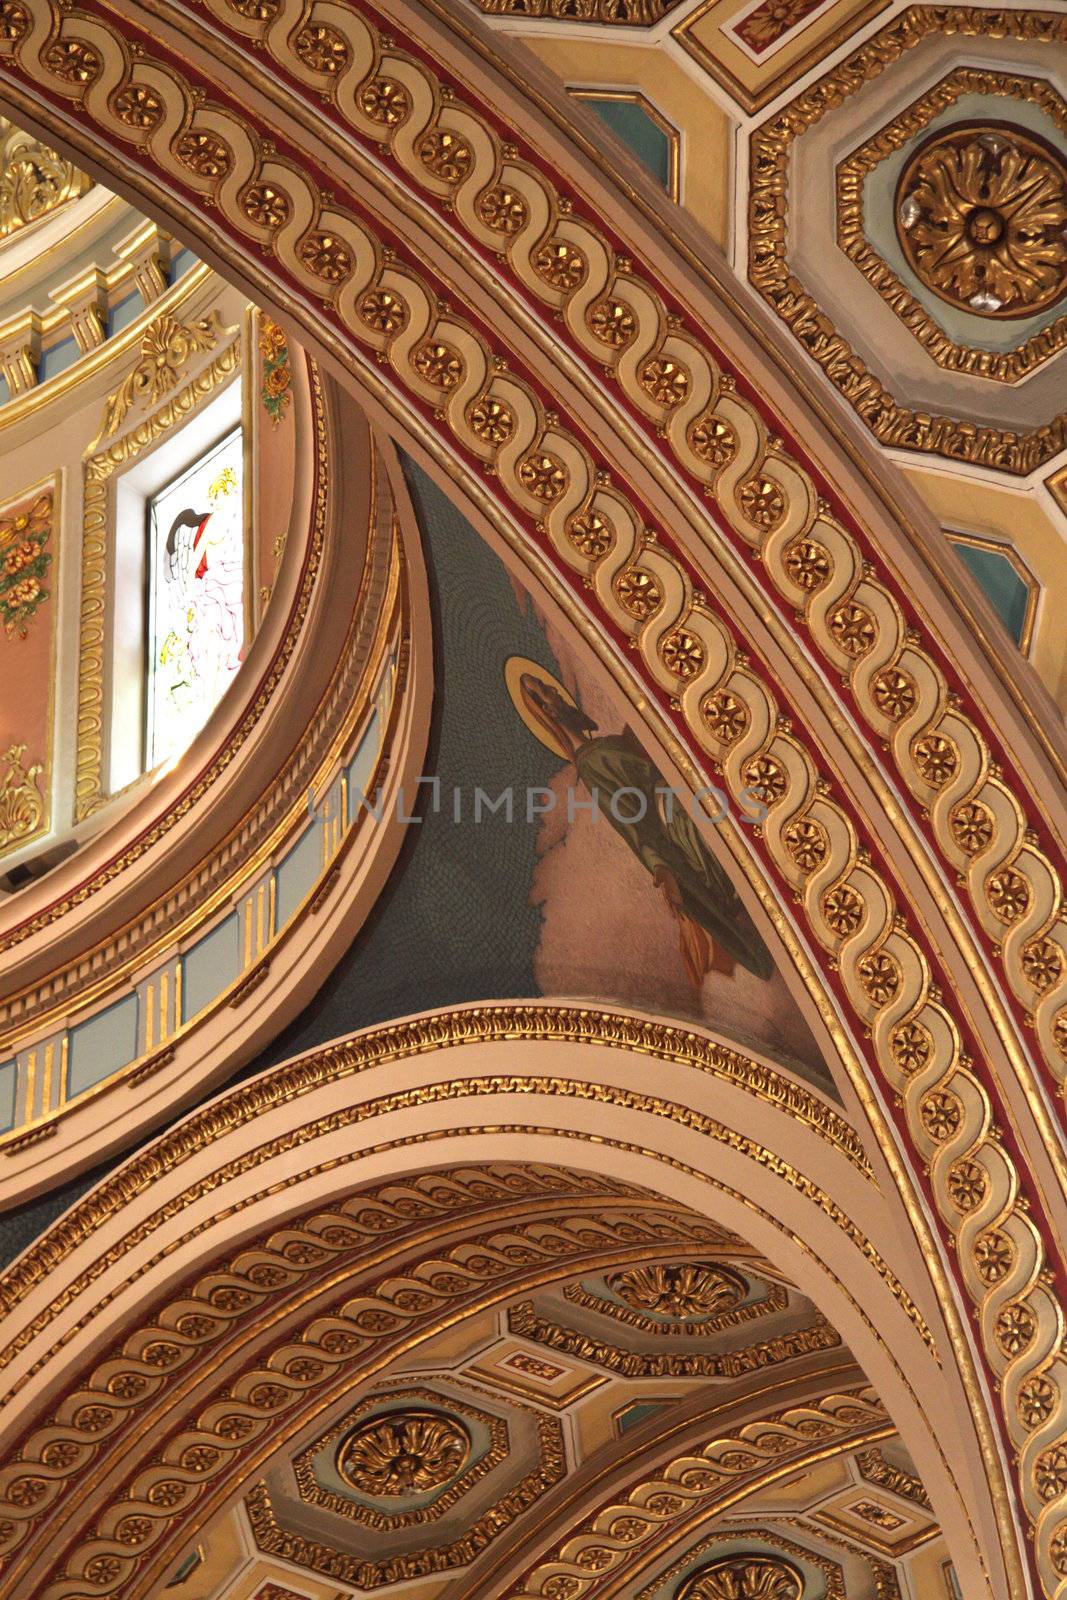 The inside painting church ceiling of the Gharghur Church in Malta